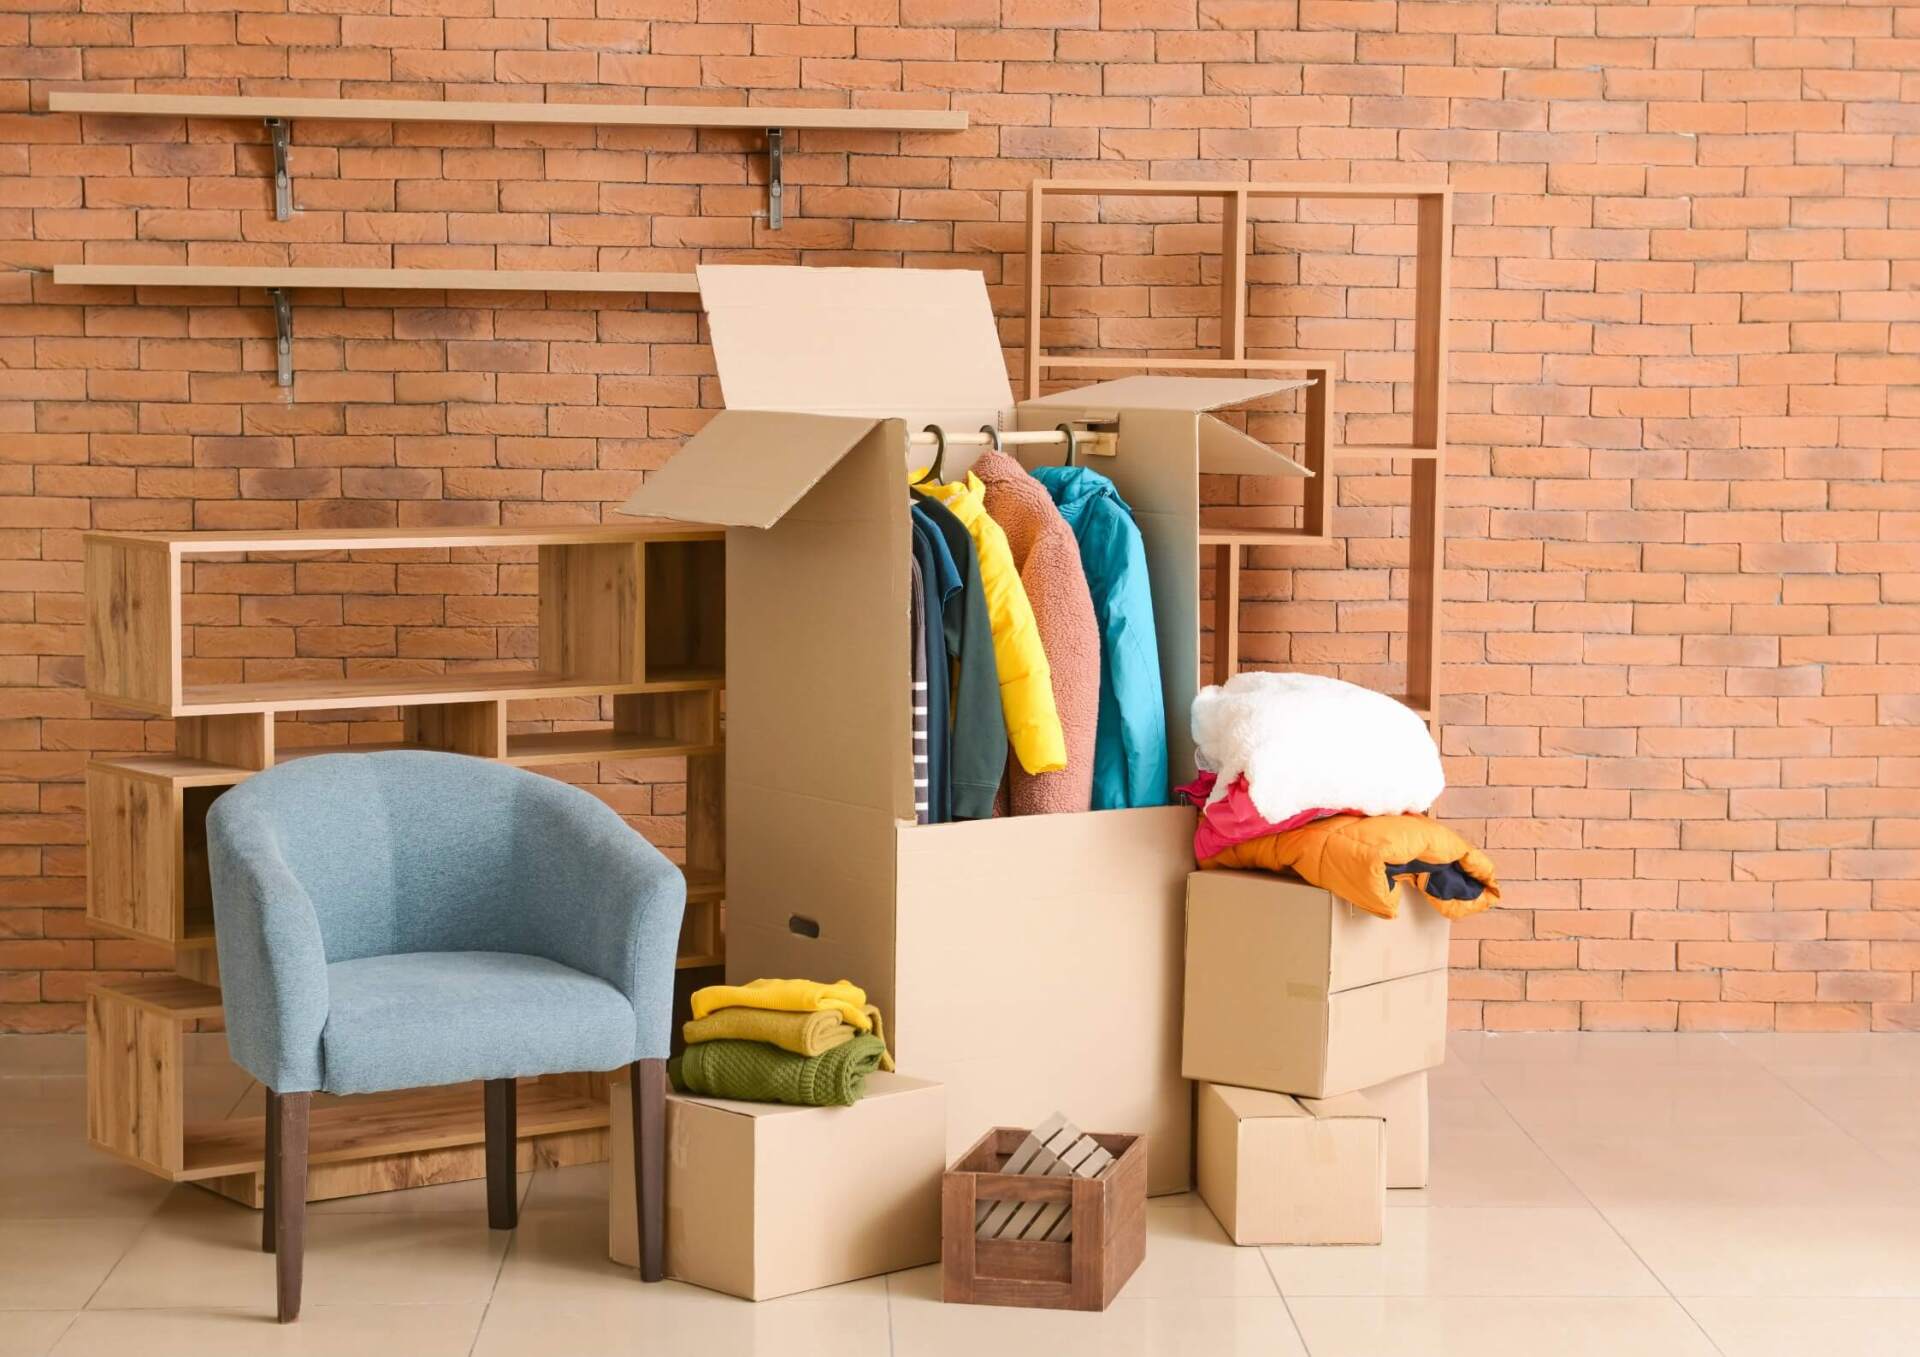 Moving boxes and furniture in a room with a brick wall